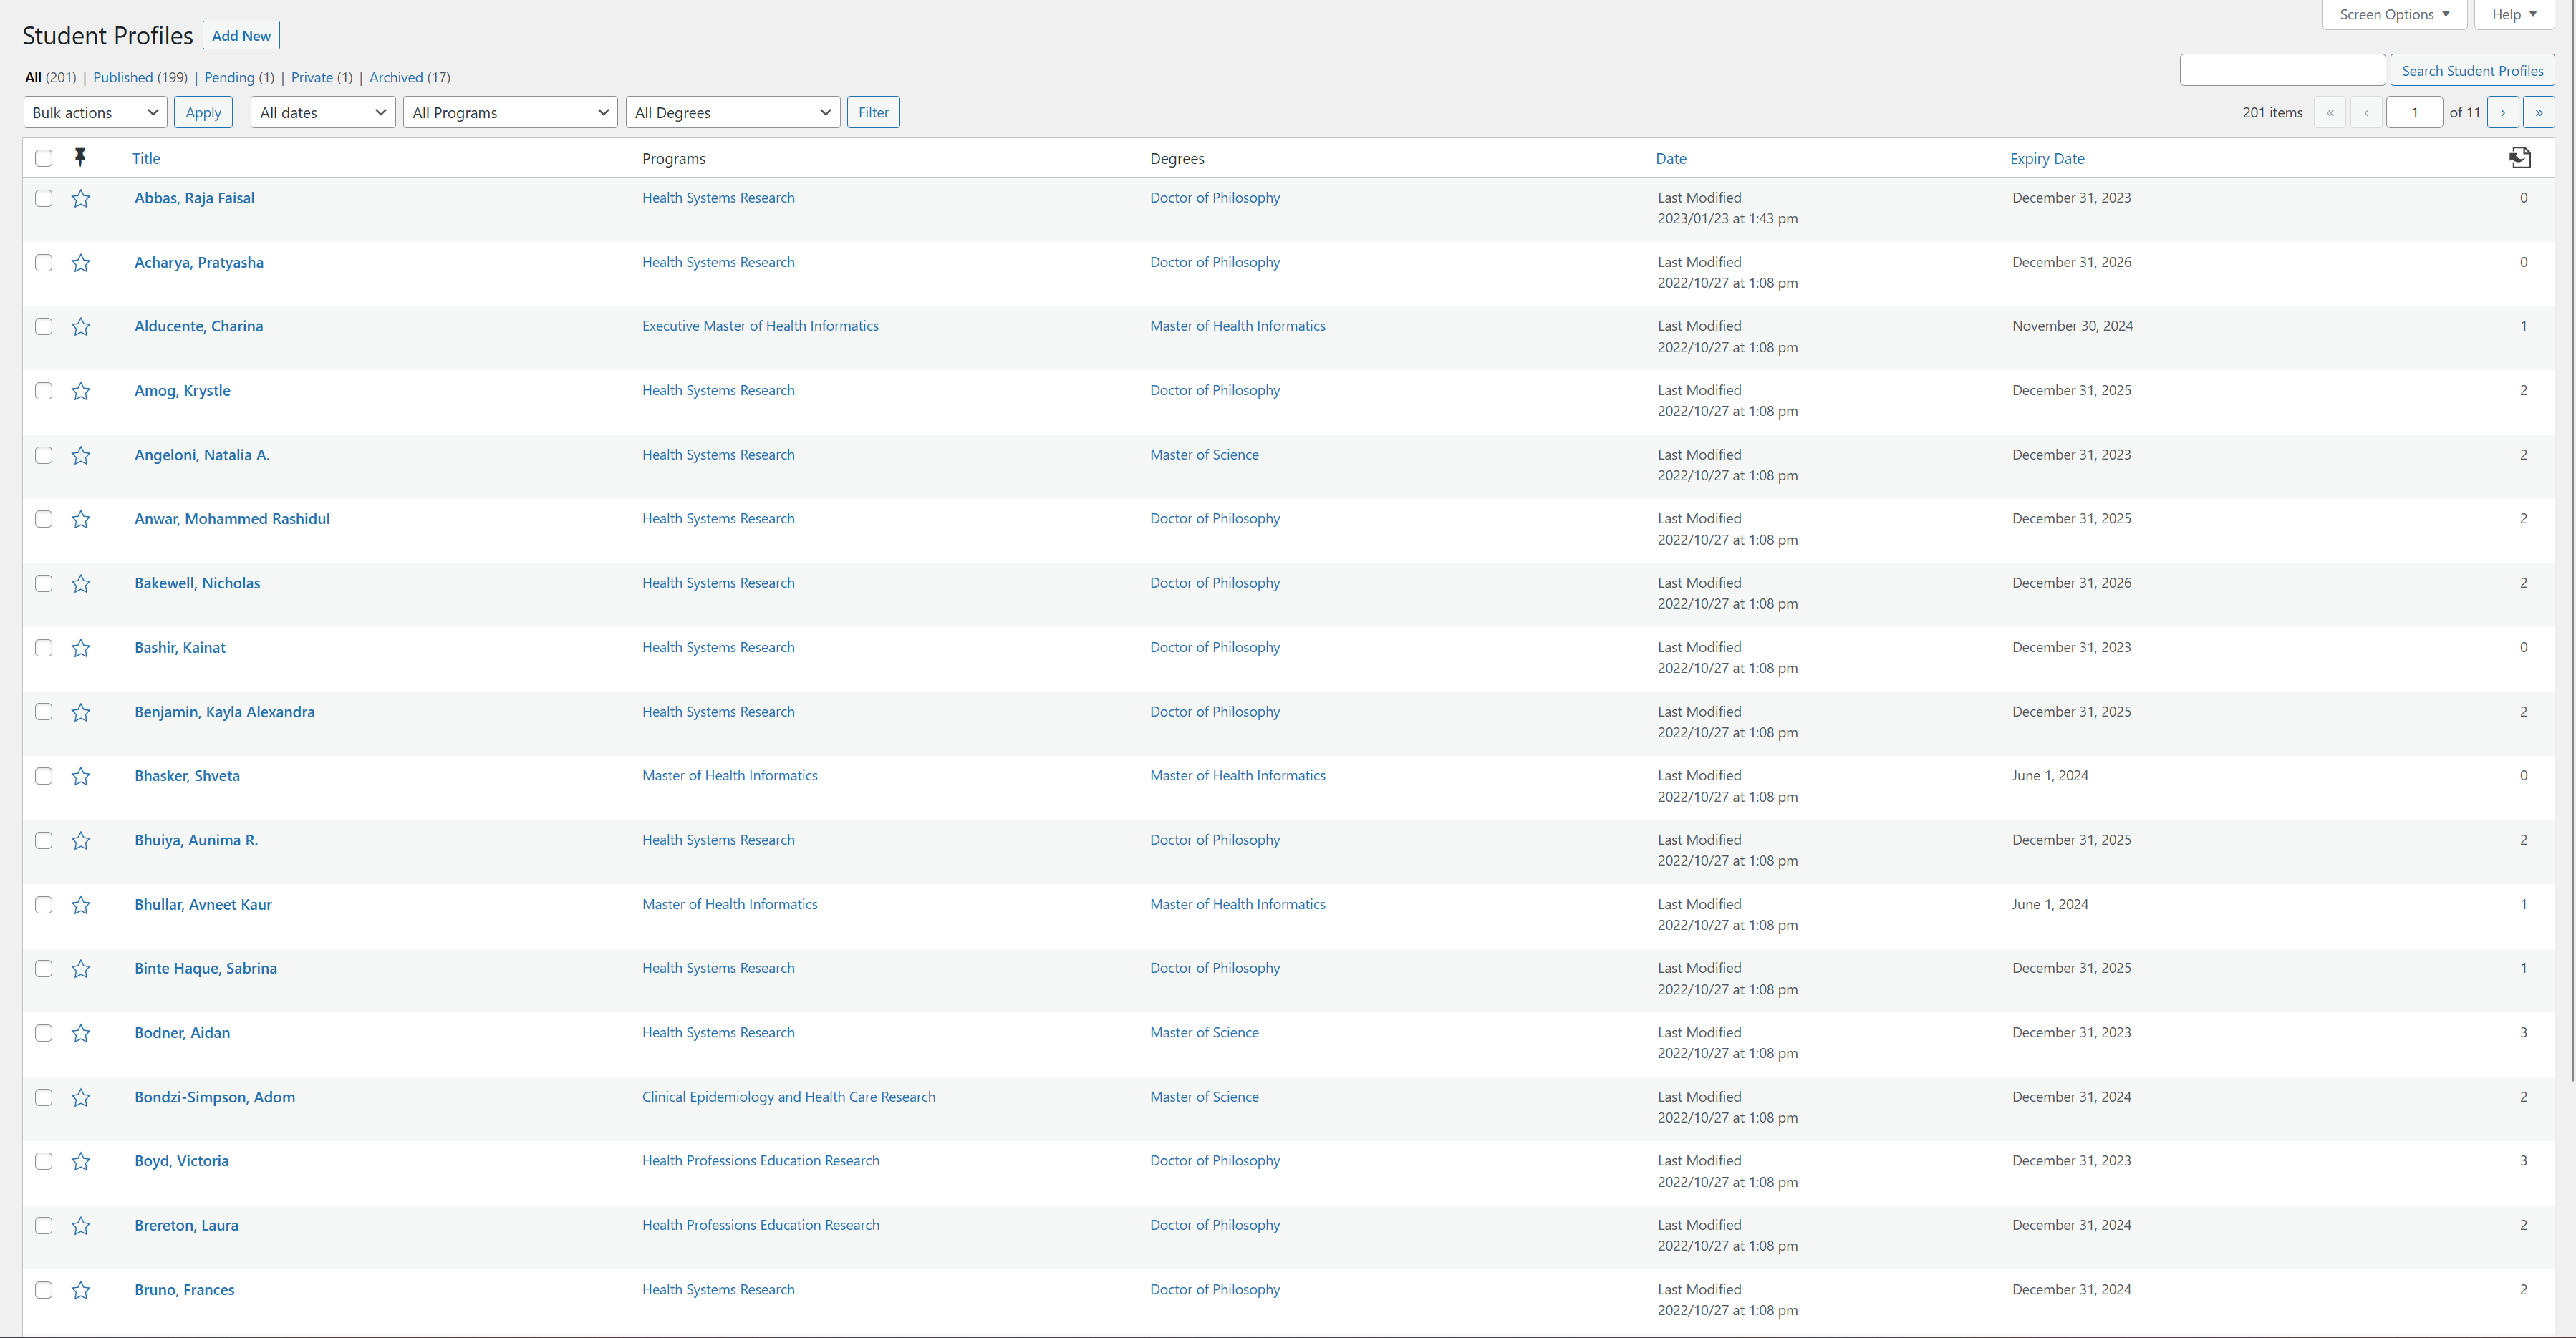 List view of all faculty profiles